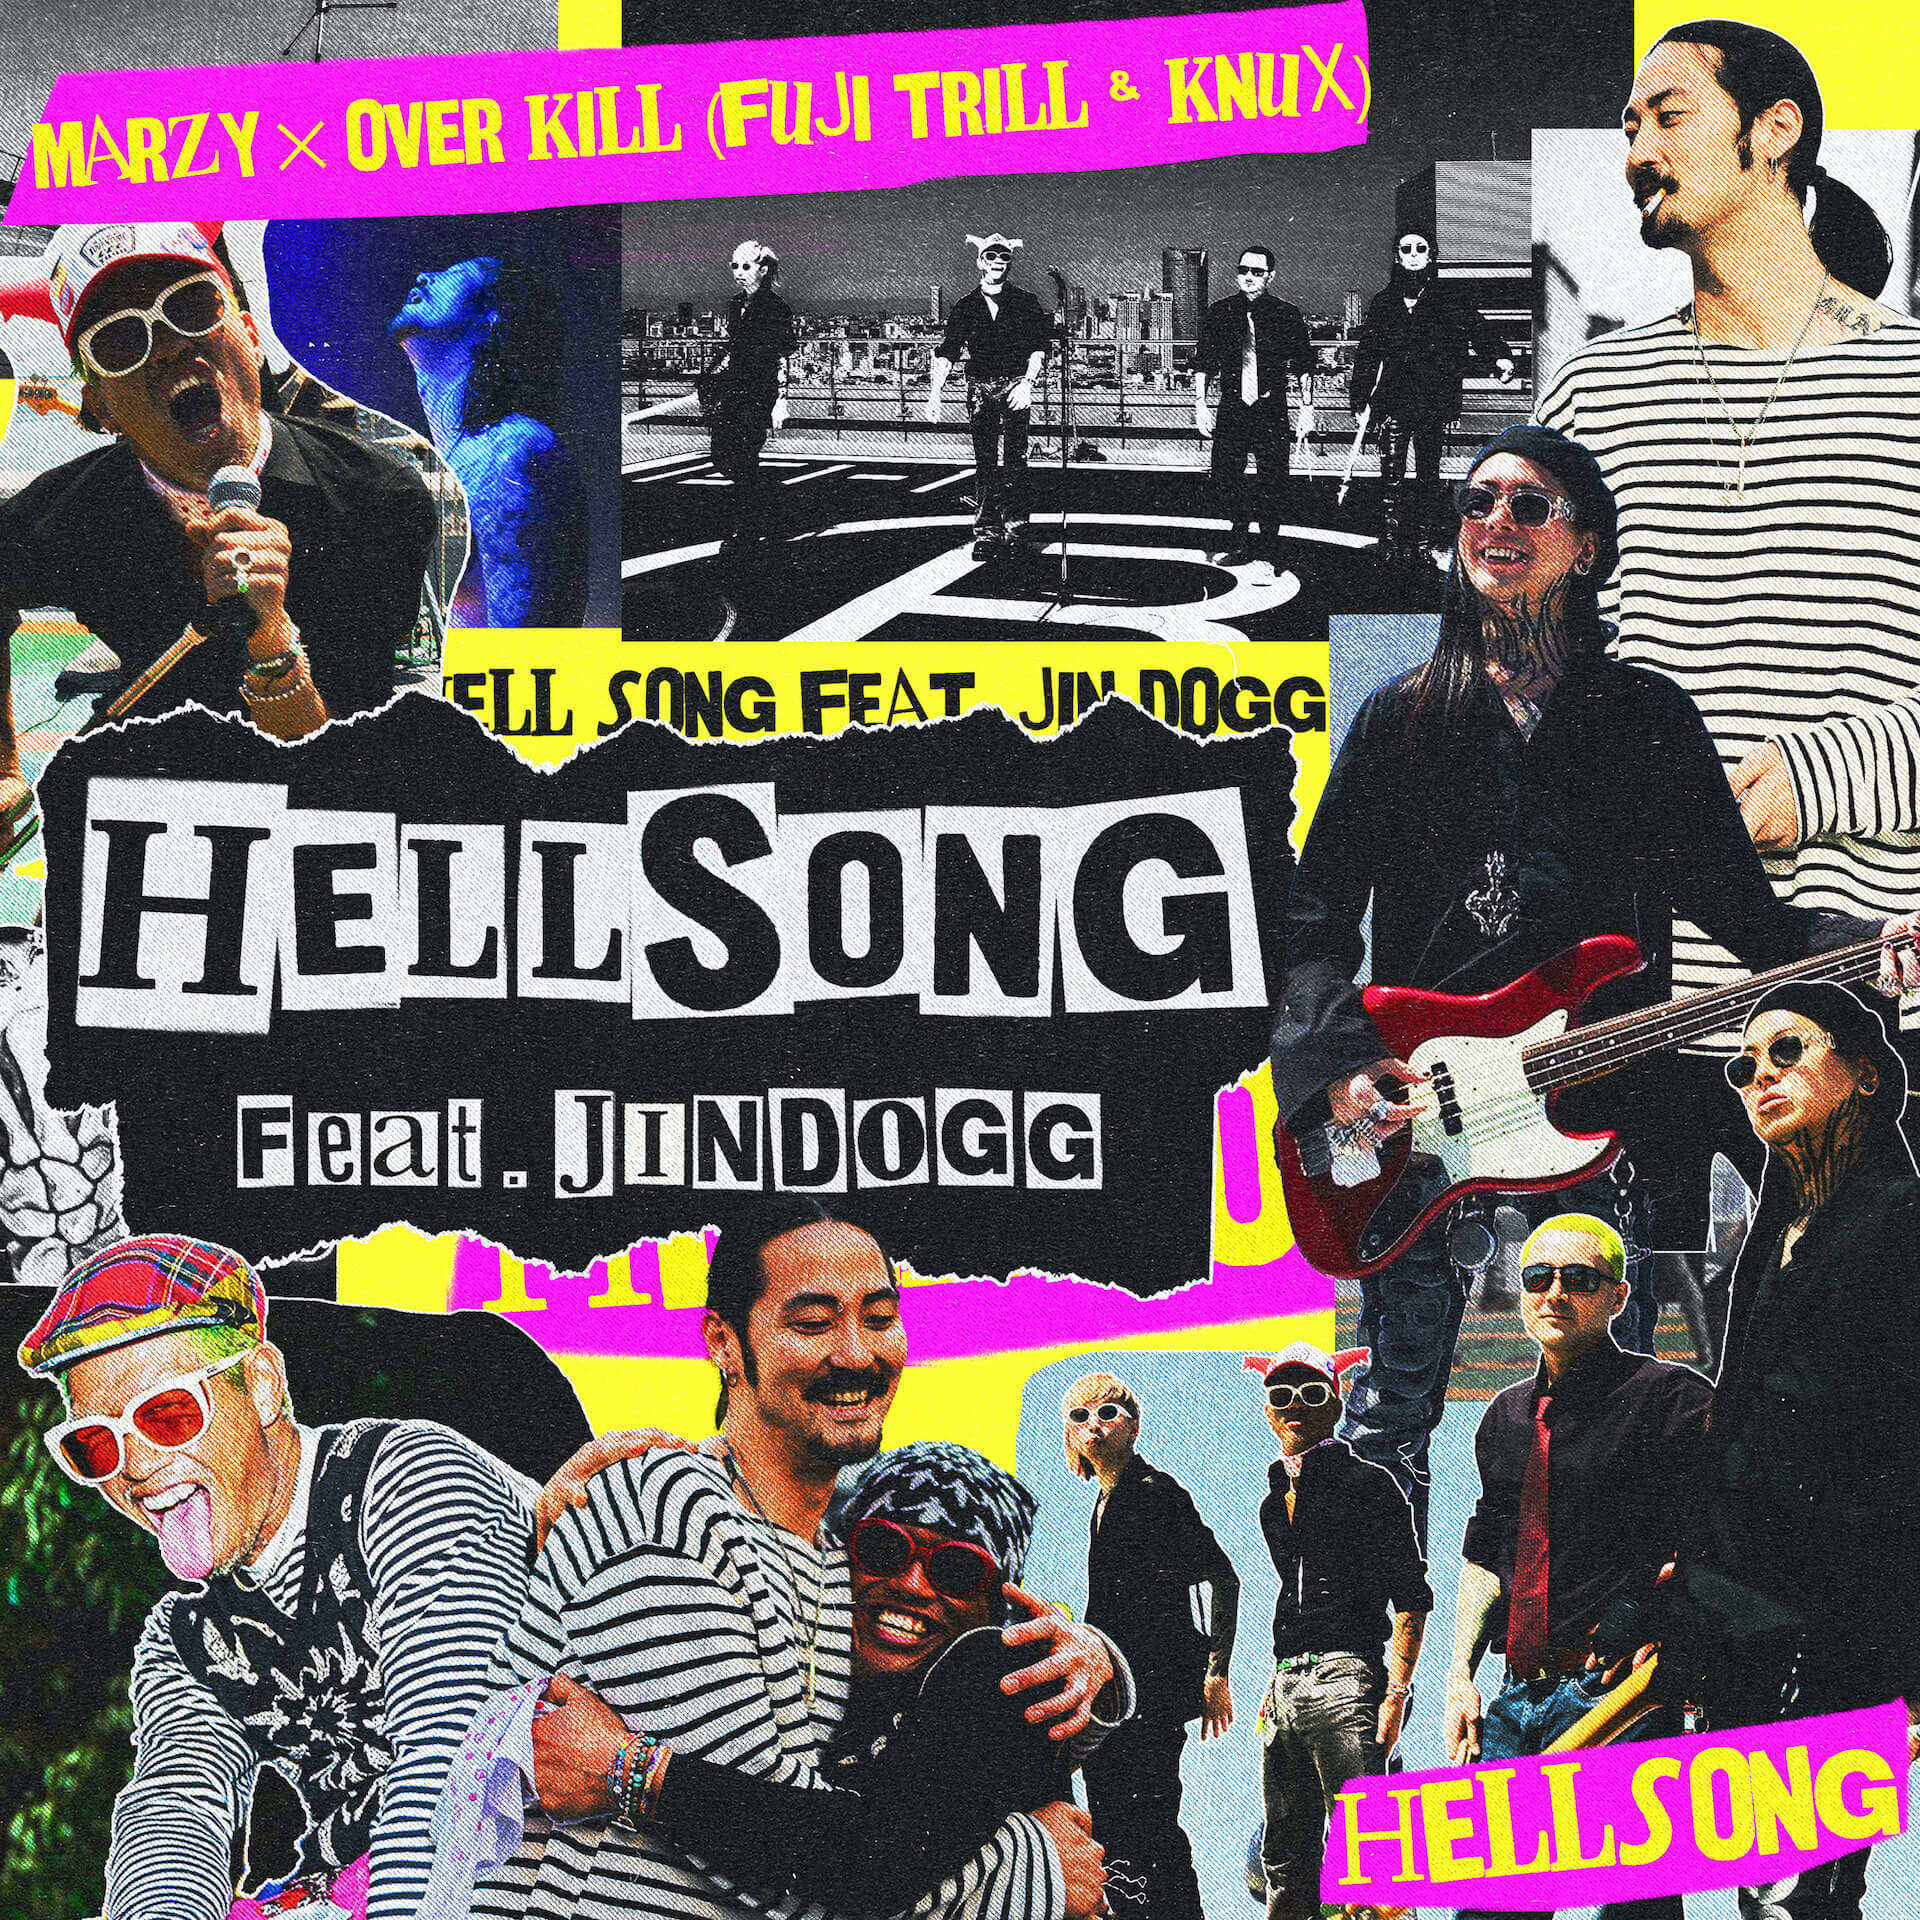 MARZY×OVER KILL（FUJI TRIL＆KNUX）が、Jin Doggを客演に迎えたシングル“HELL SONG”をリリース！ HELL-SONG16